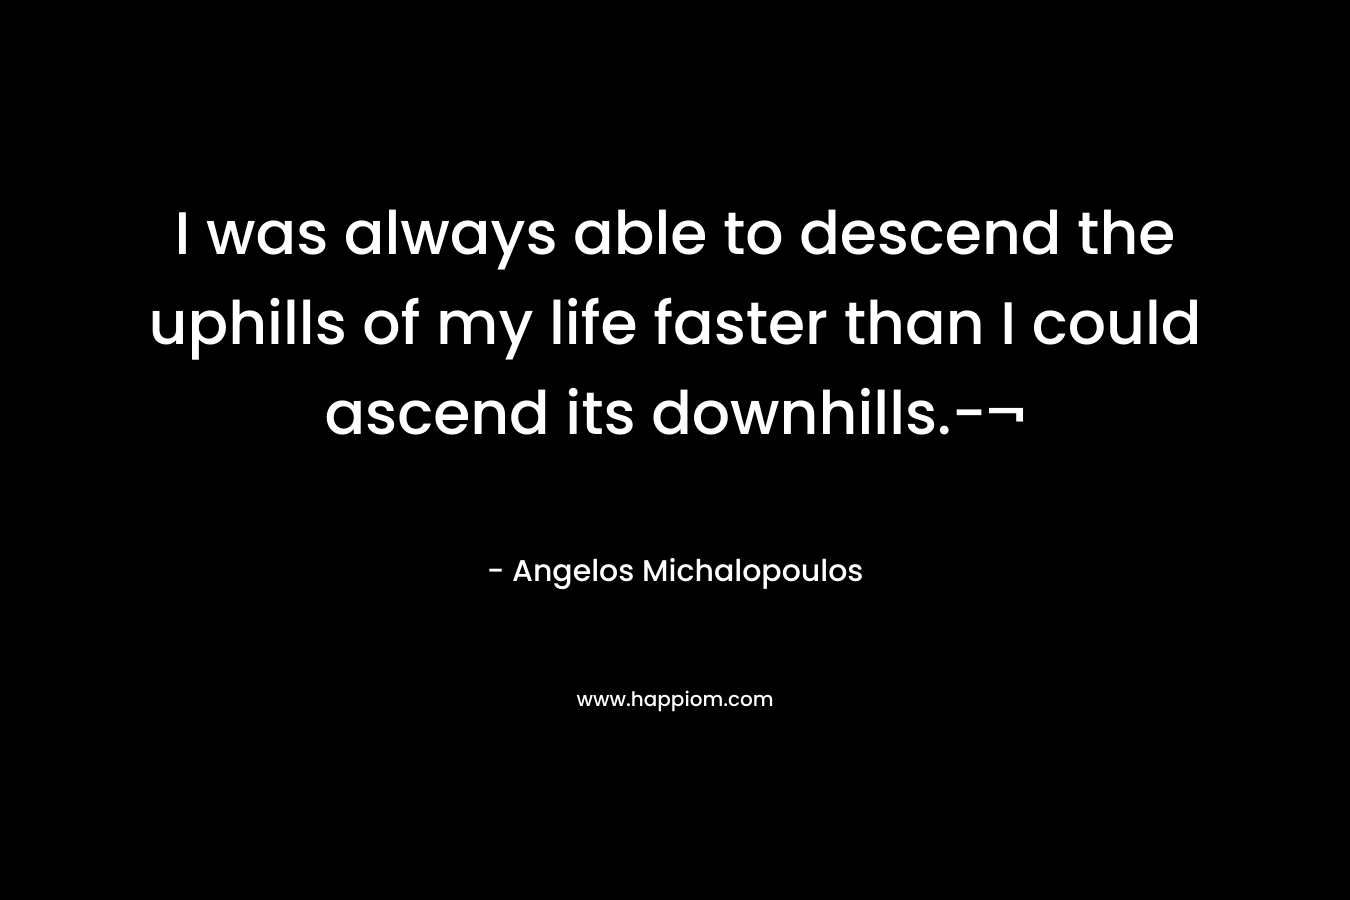 I was always able to descend the uphills of my life faster than I could ascend its downhills.-¬